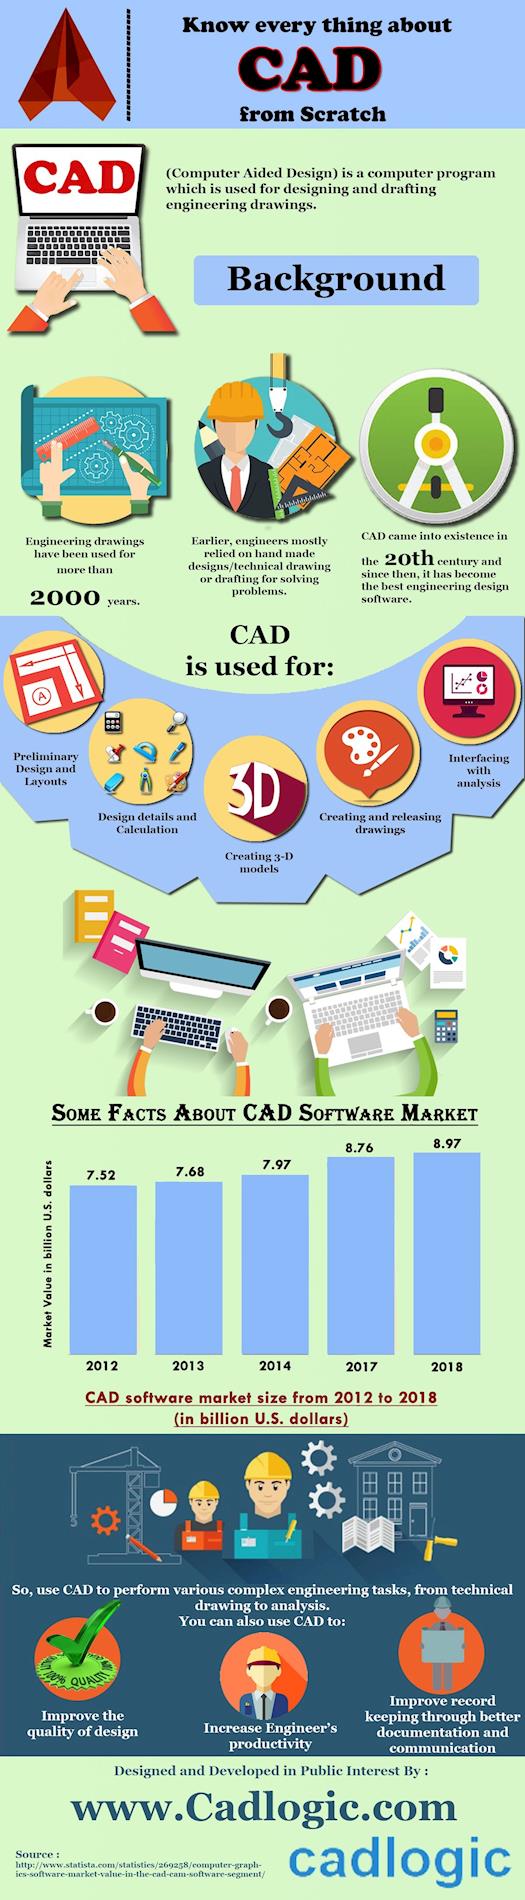 Know everything about CAD from Scratch